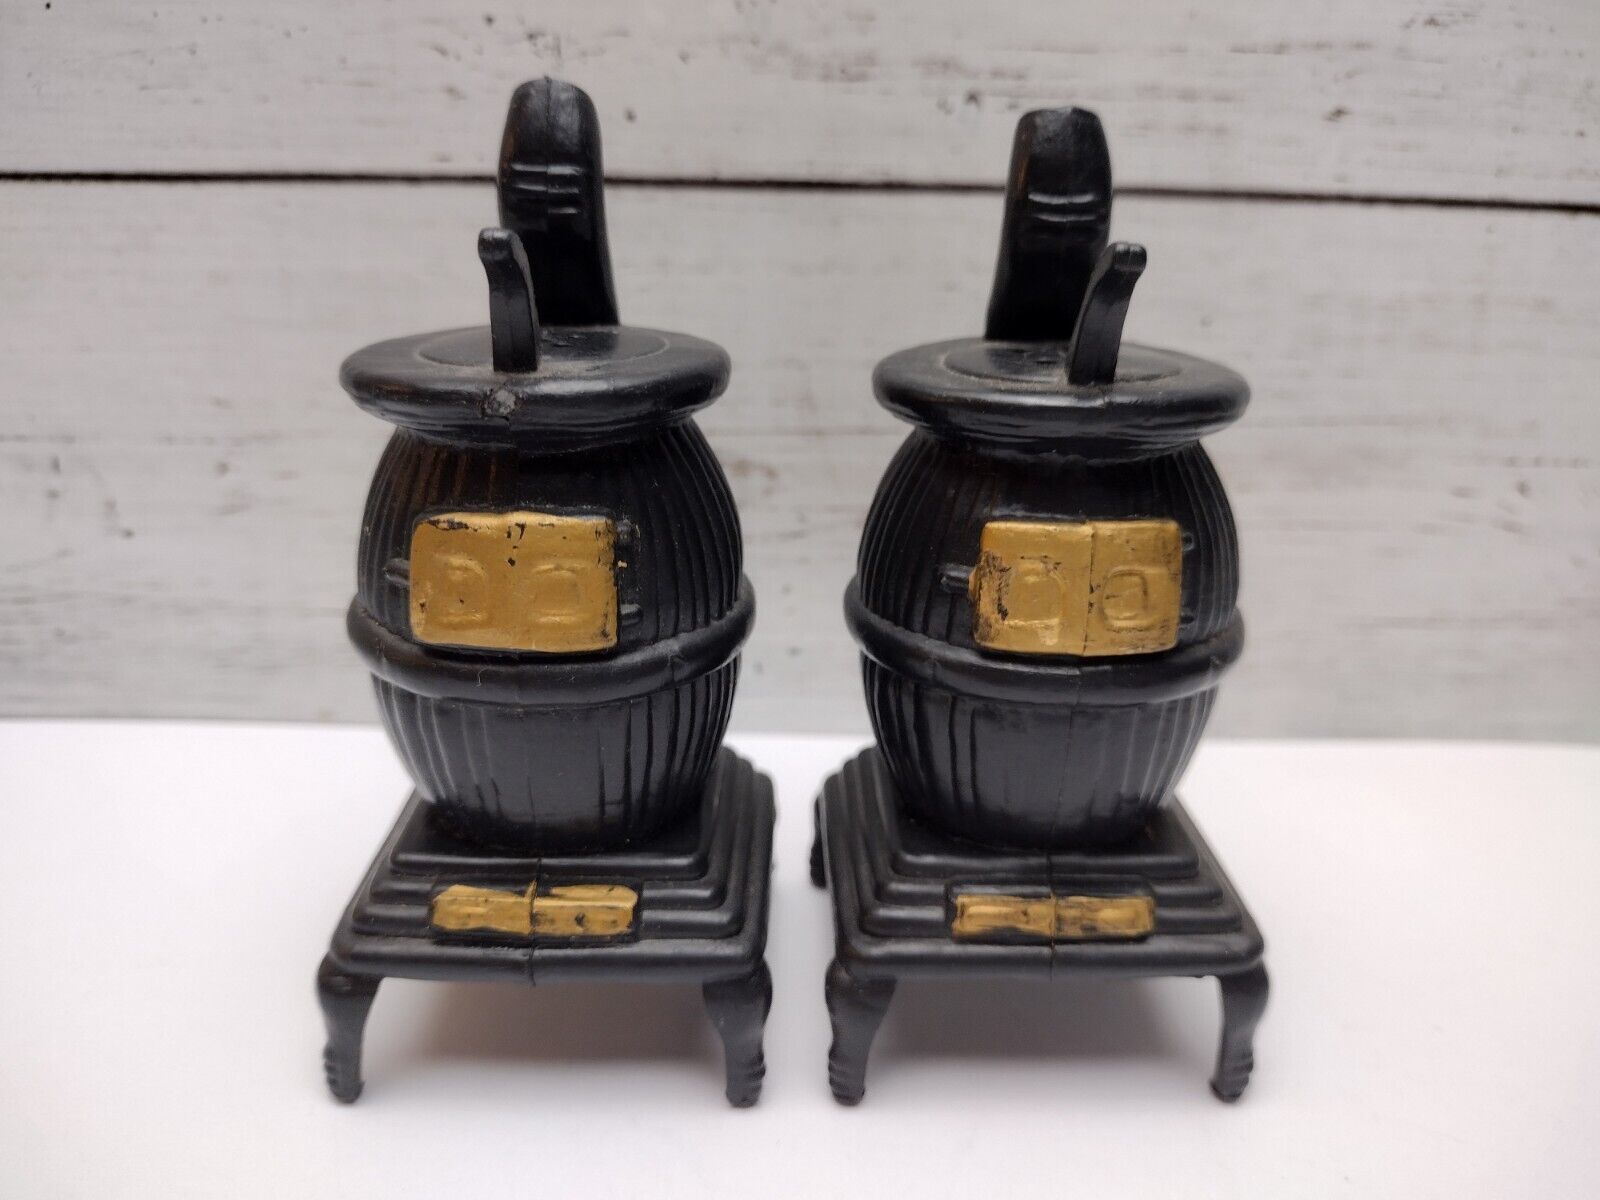 Vintage Plastic Or Celluloid Pot Belly Stove Salt And Pepper Shakers